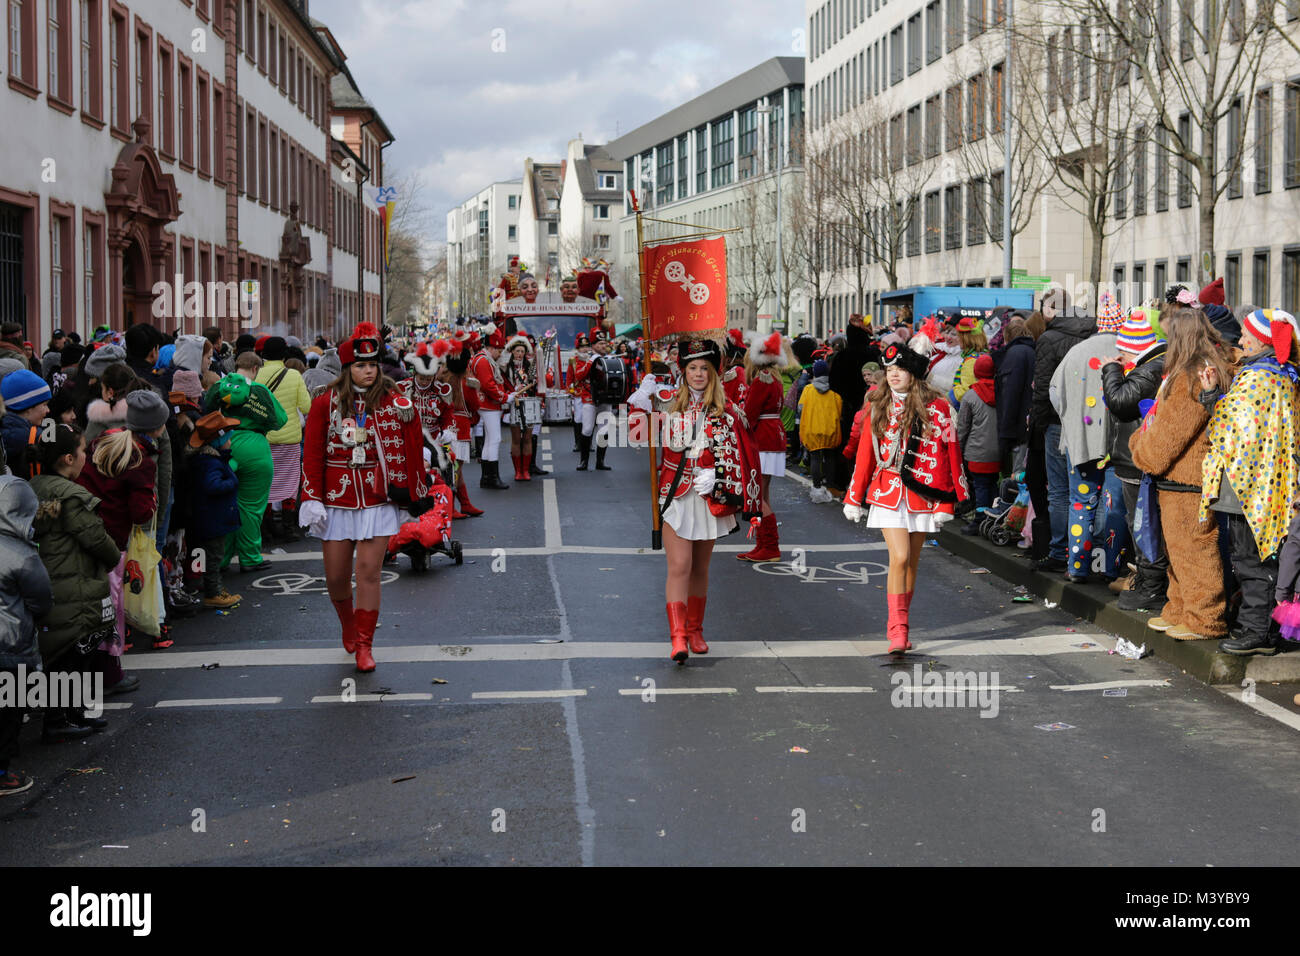 Mainz, Germany. 12th February 2018. Members of the Mainzer Husaren Garde march in the parade. Around half a million people lined the streets of Mainz for the traditional Rose Monday Carnival Parade. The 9 km long parade with over 8,000 participants is one of the three large Rose Monday Carnival Parades in Germany. Credit: Michael Debets/Alamy Live News Stock Photo